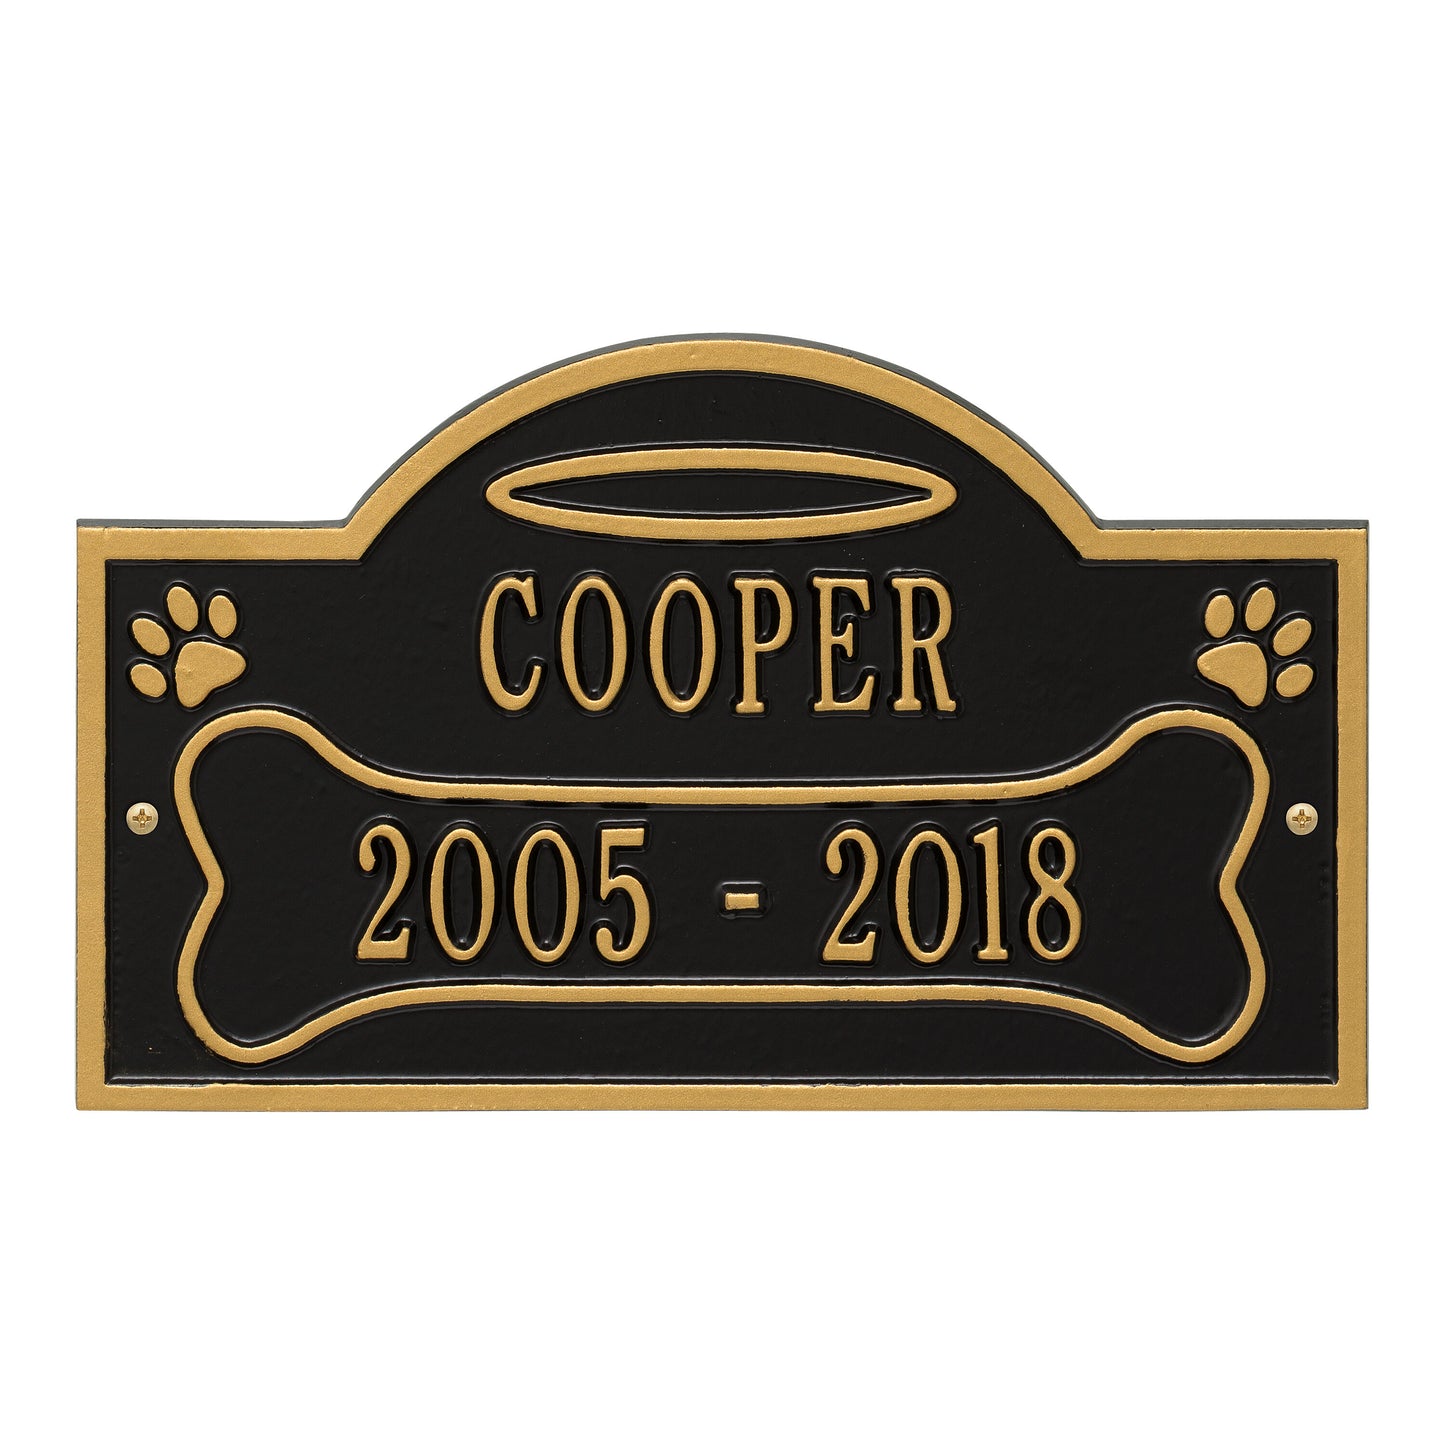 Whitehall Products All Dogs Go To Heaven Pet Memorial Personalized Wall Or Ground Plaque Two Lines Bronze/gold